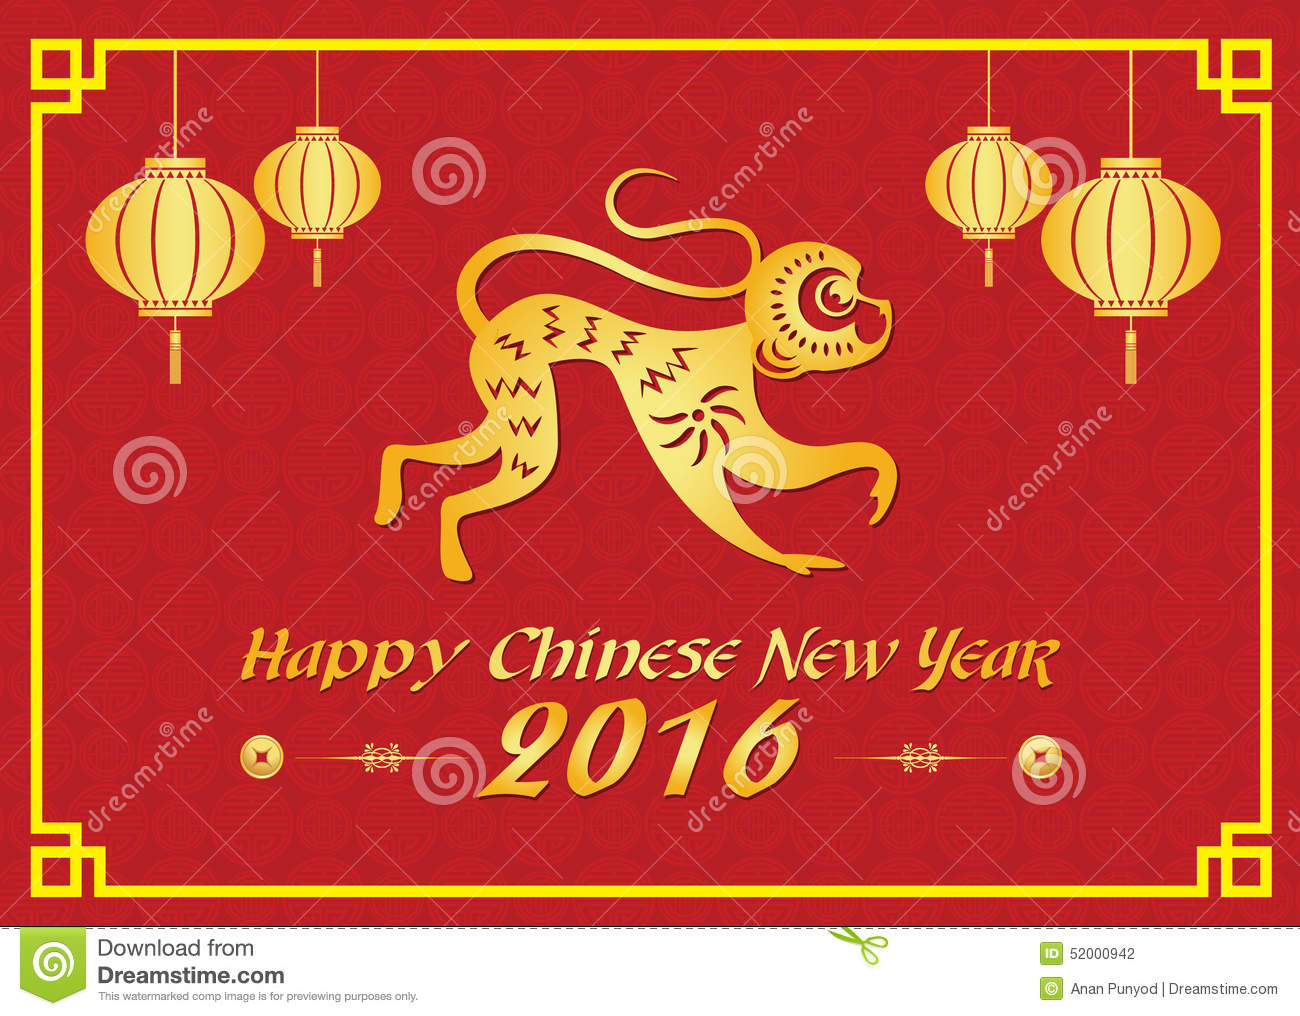 Monkey Chinese New Year Greeting Card Design Stock Vector